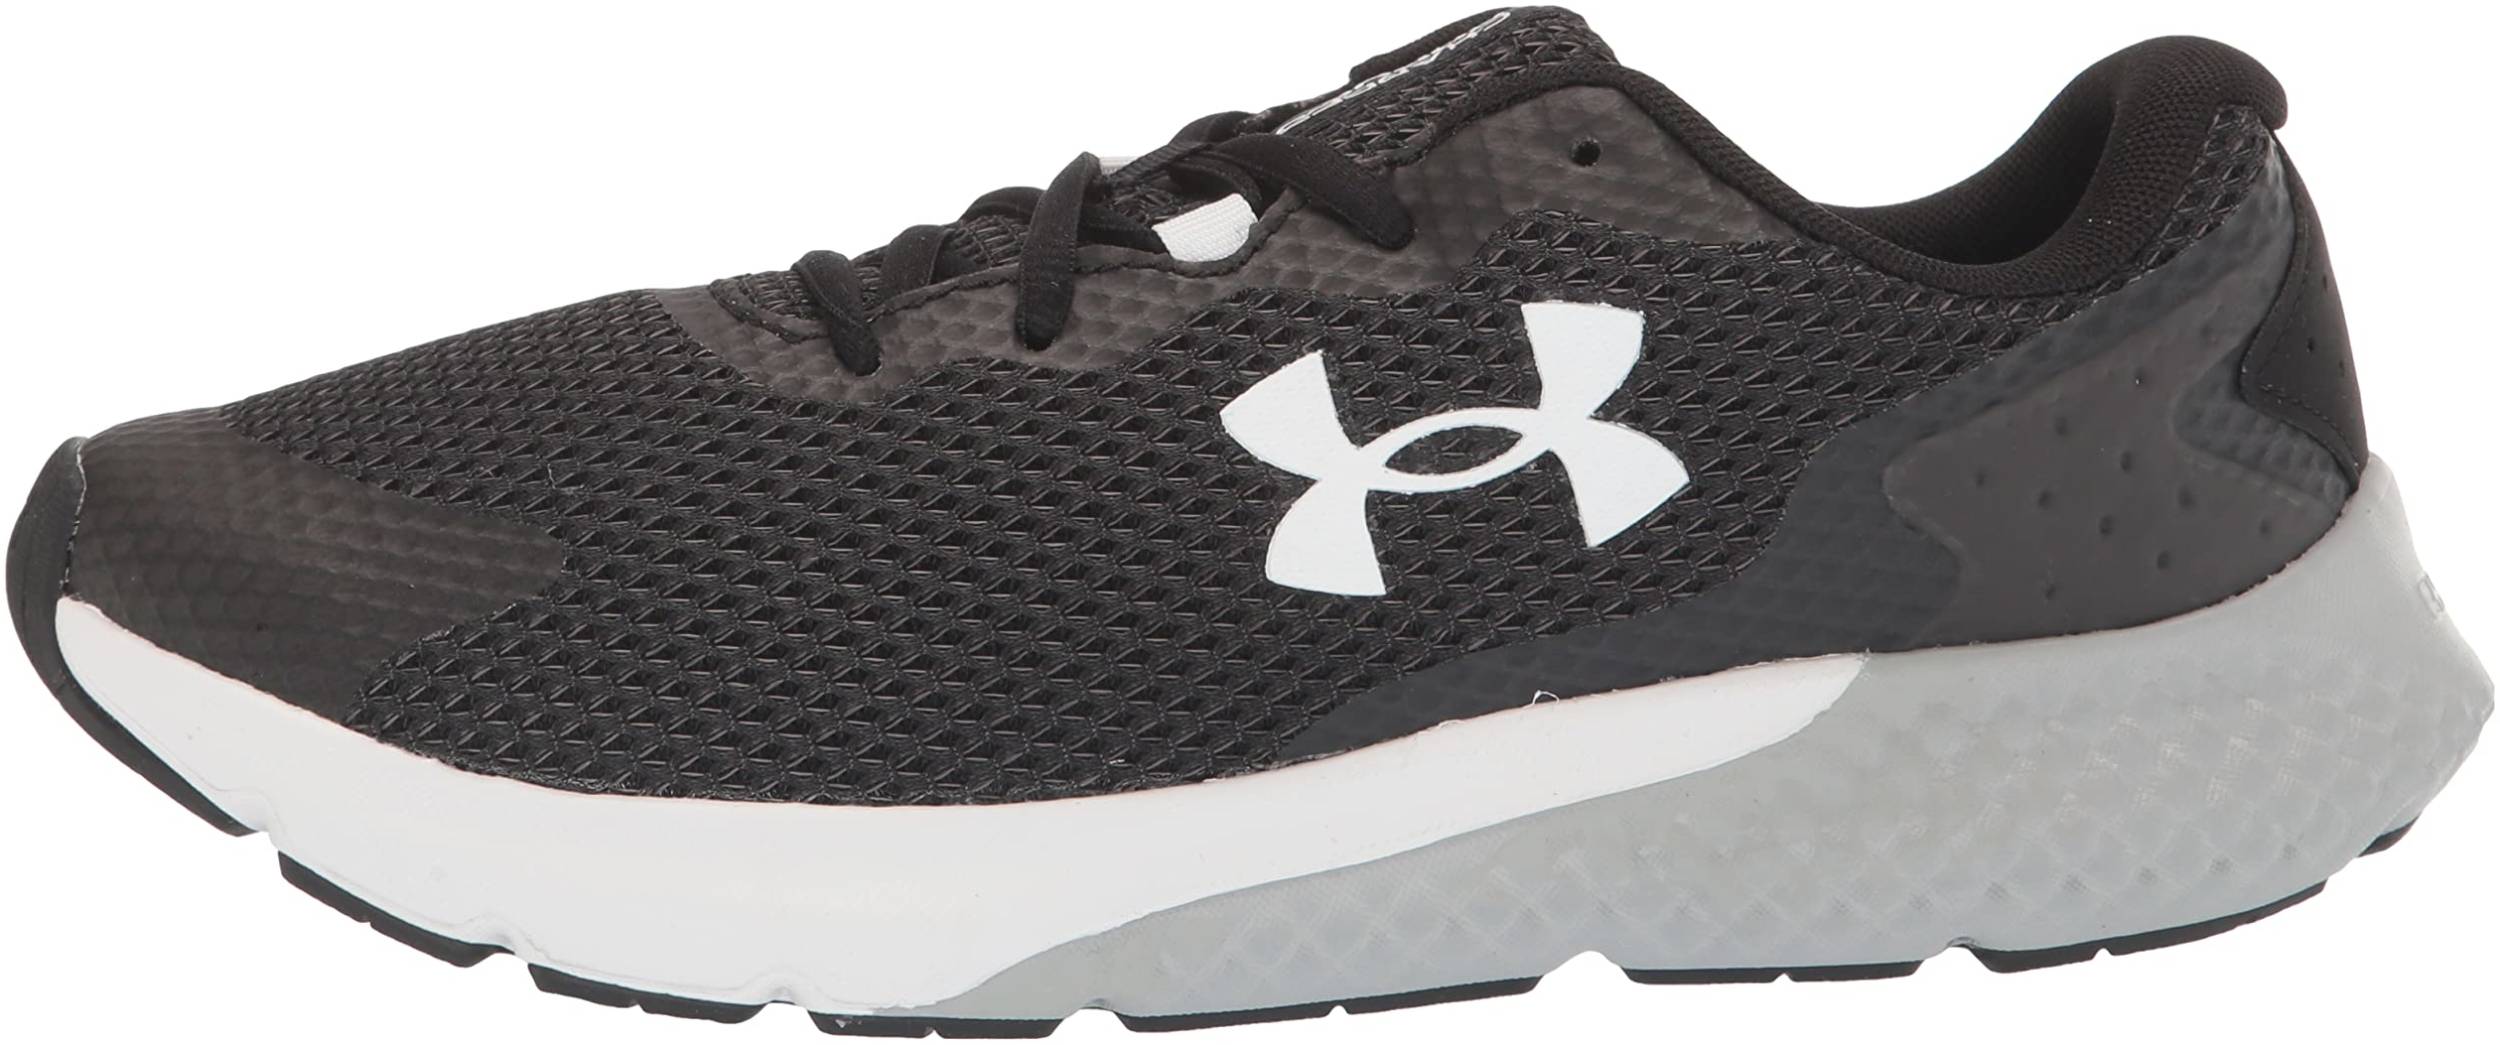 Under Armour Charged Rogue 3 Review 2023, Facts, Deals ($42 